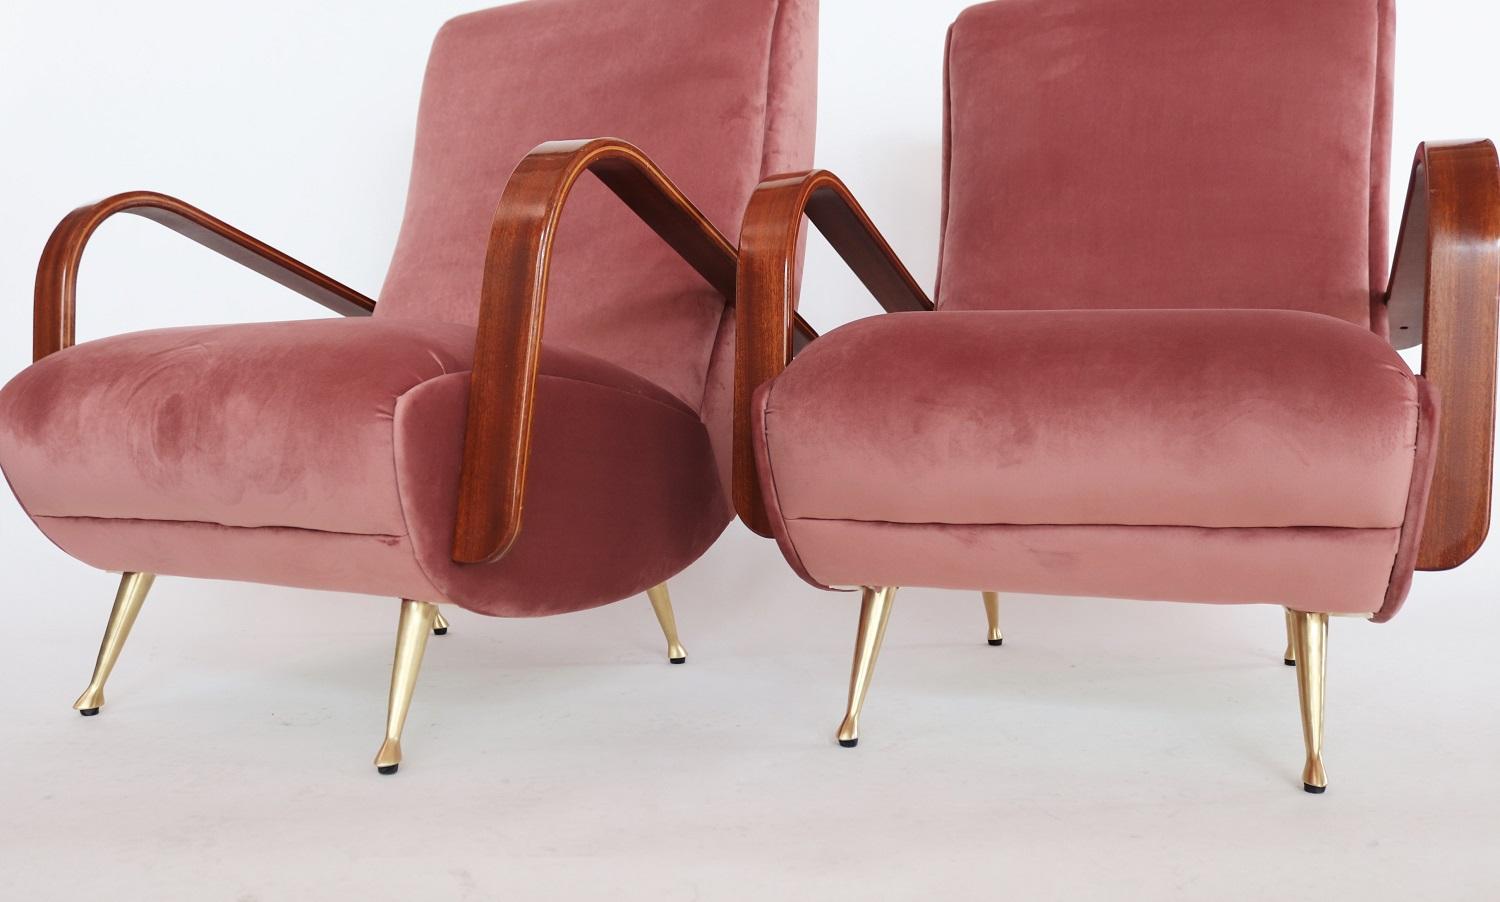 Italian Midcentury Armchairs in Mahogany, Brass and Coral Red Velvet, 1950s 6